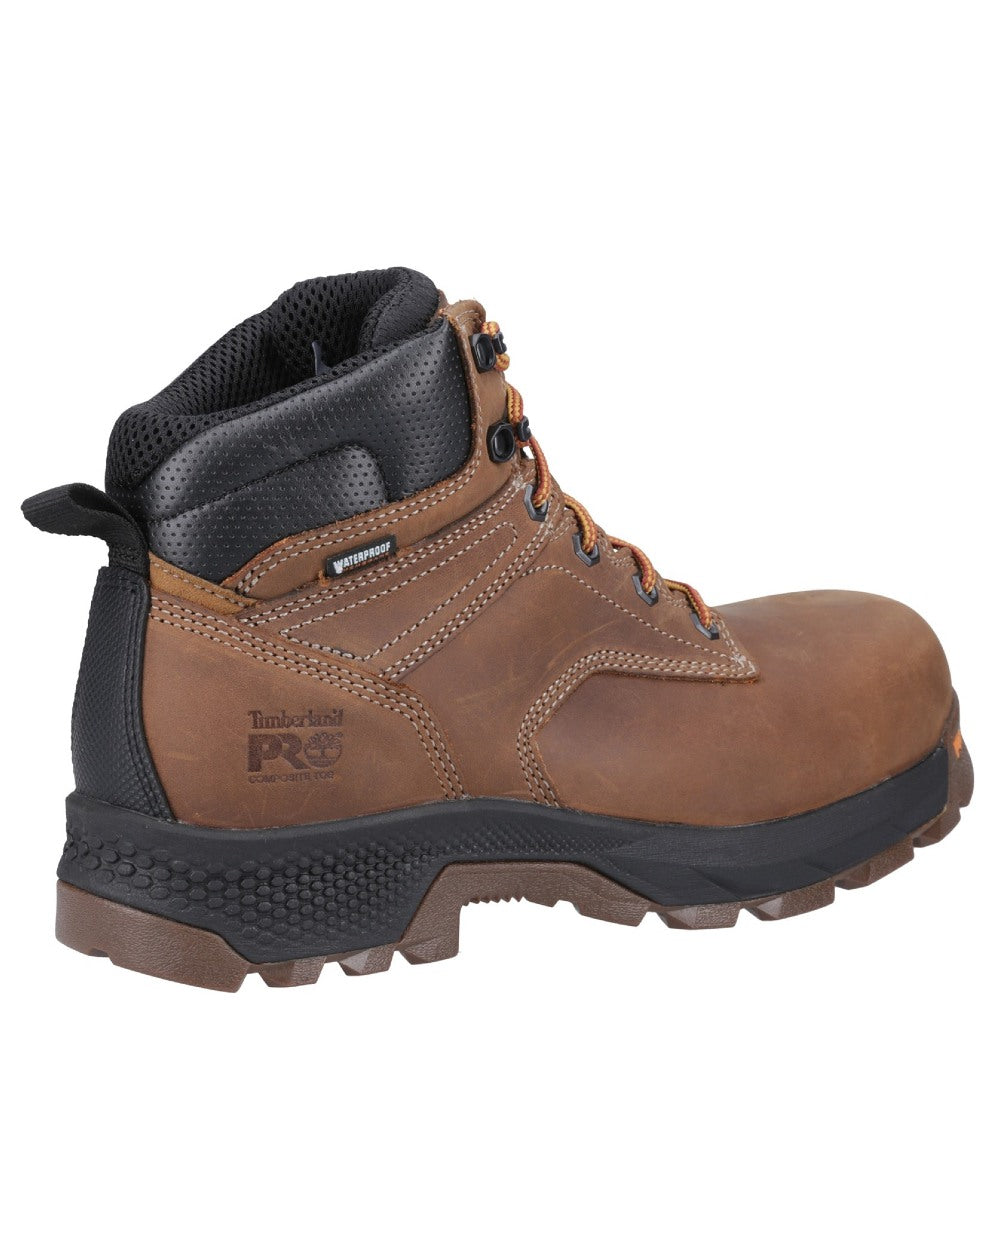 Brown coloured Timberland Pro Titan 6inch Safety Boots on white background 